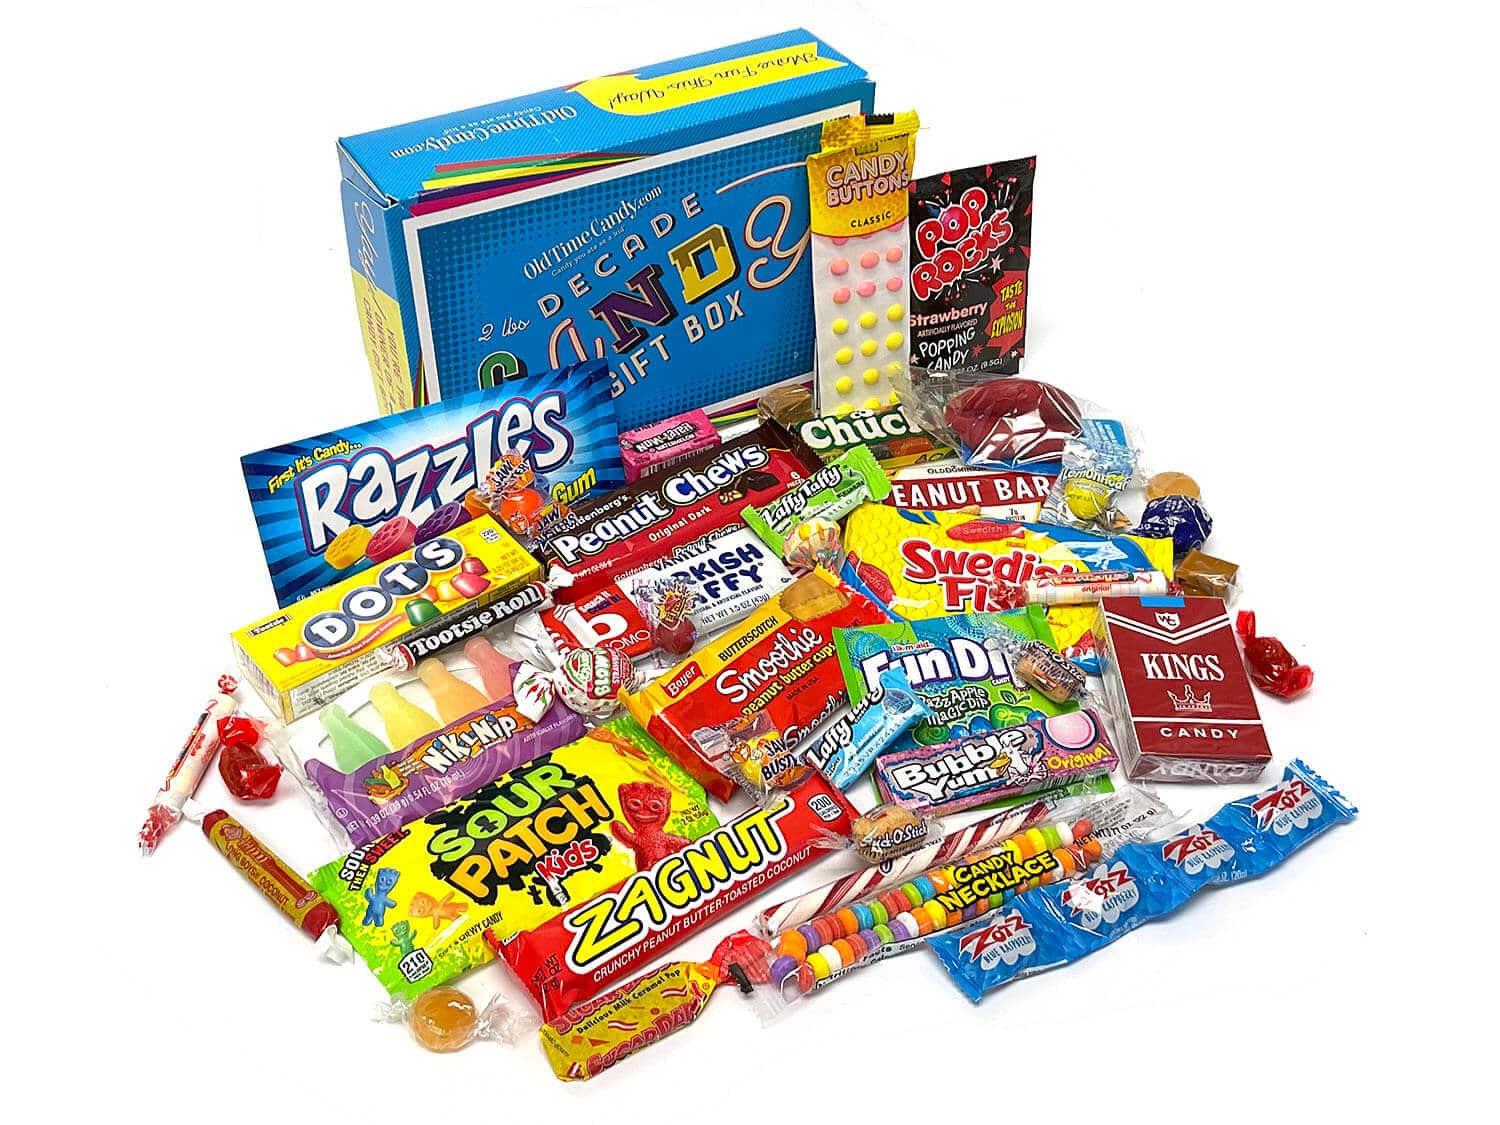 Clear Candy Gift Box, Transparent Boxes for Party Favors (2 x 2 x 6 in, 50 Pack)